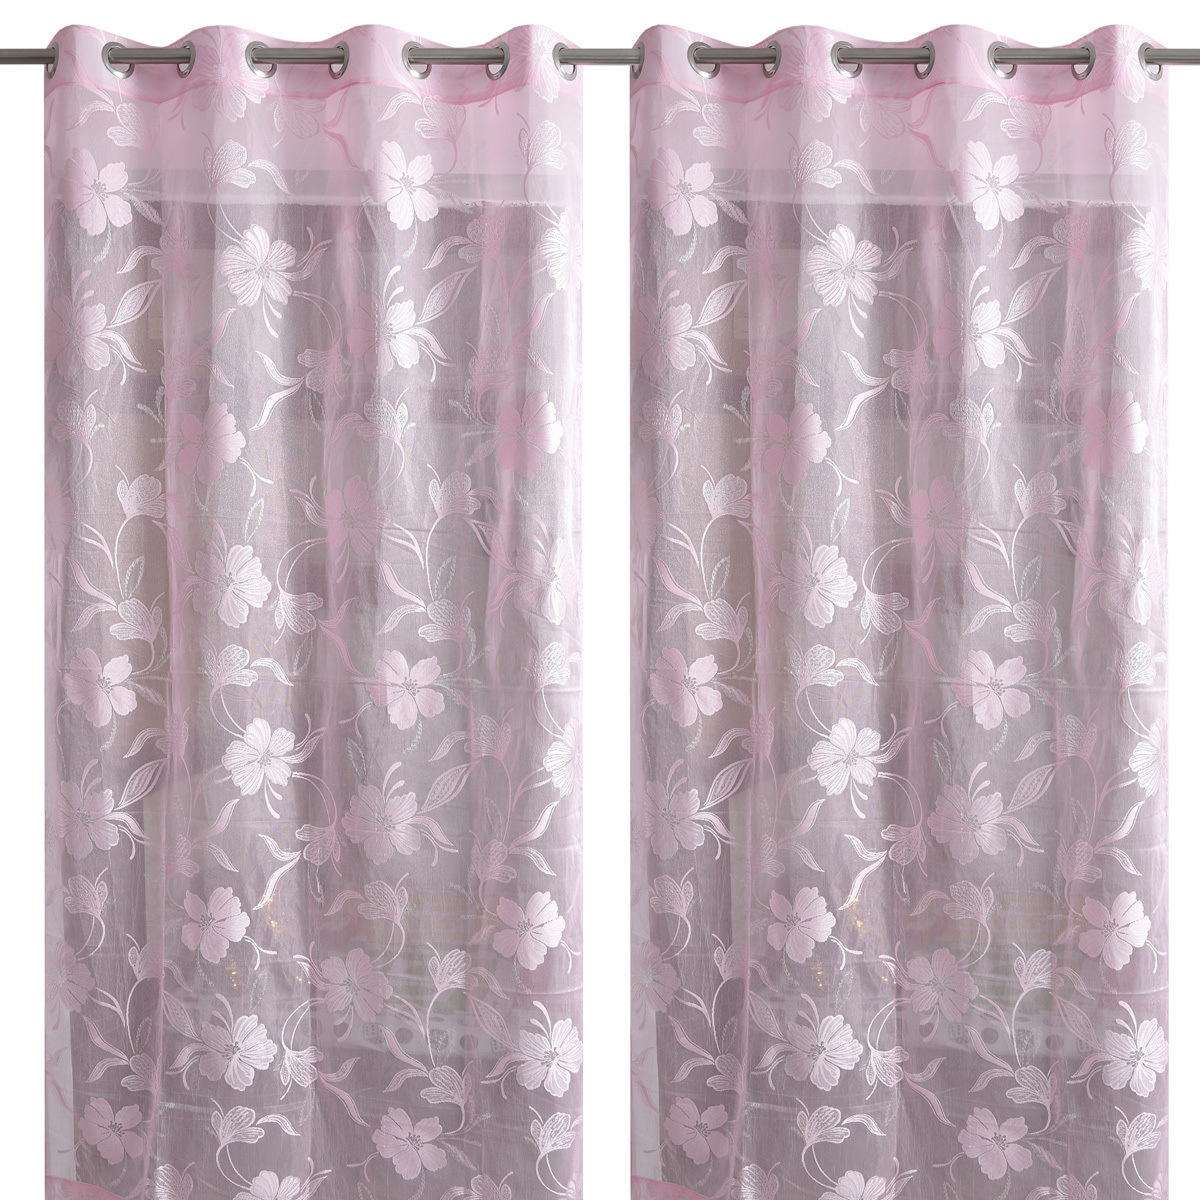 HANDTEX HOME Sheer Pink Net Curtains With Beautiful Embroidered Floral Designs for Door 4ft x 7ft Set of 2 SP03